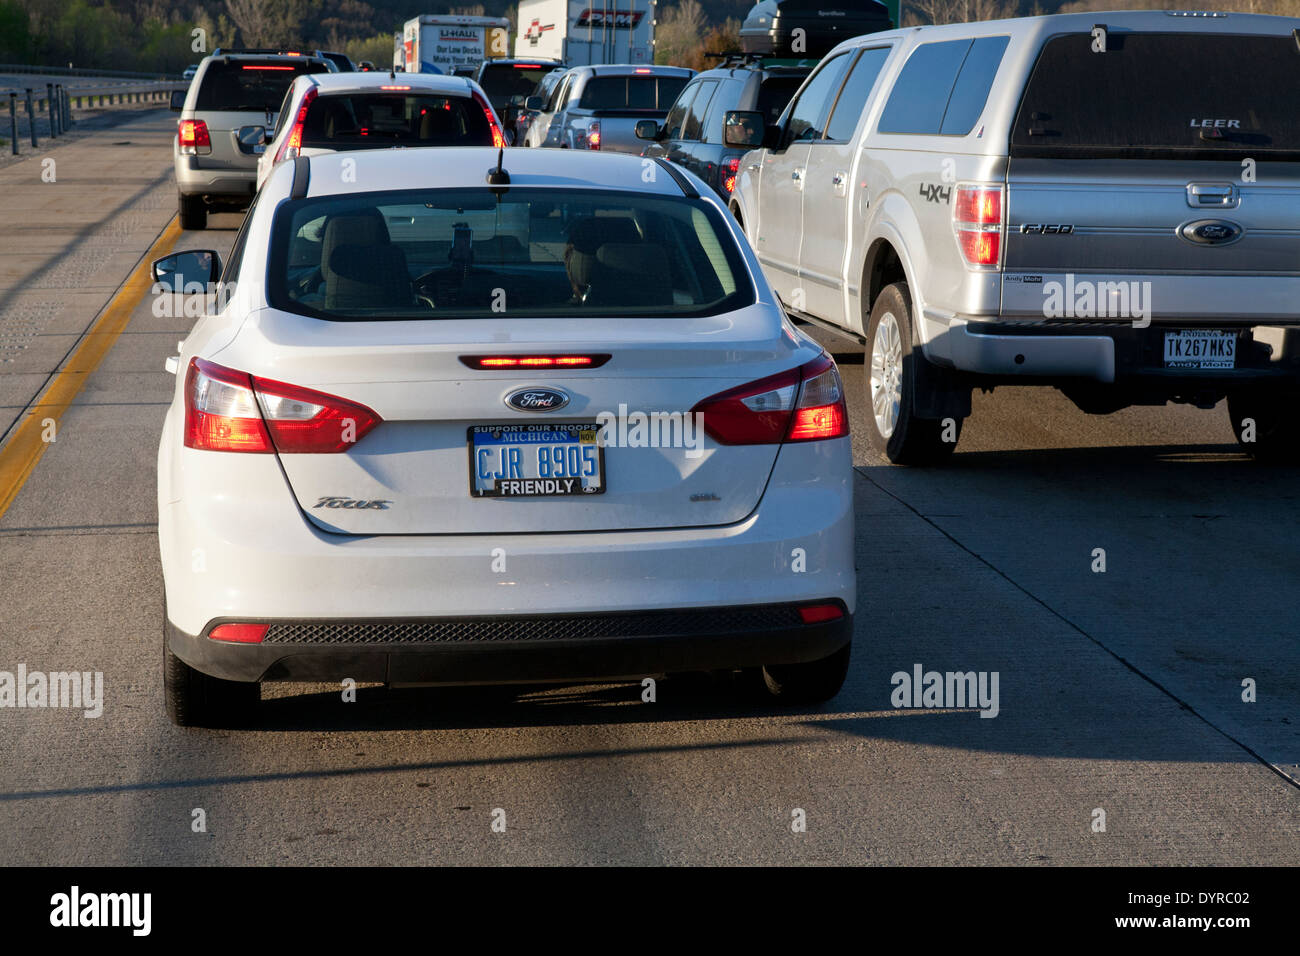 Automobiles stuck in stopped highway traffic. Stock Photo